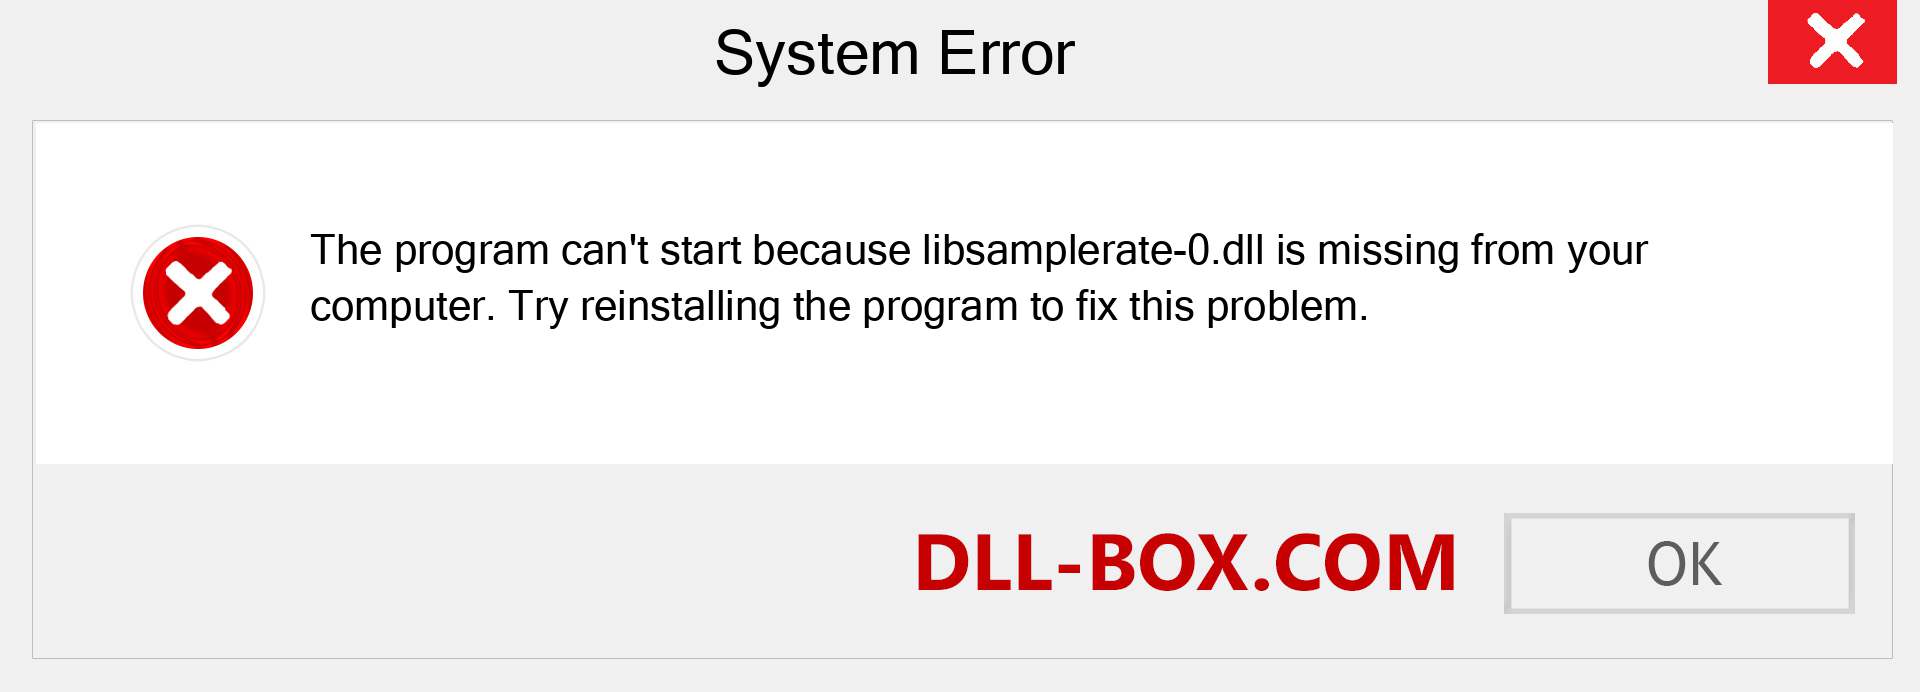  libsamplerate-0.dll file is missing?. Download for Windows 7, 8, 10 - Fix  libsamplerate-0 dll Missing Error on Windows, photos, images